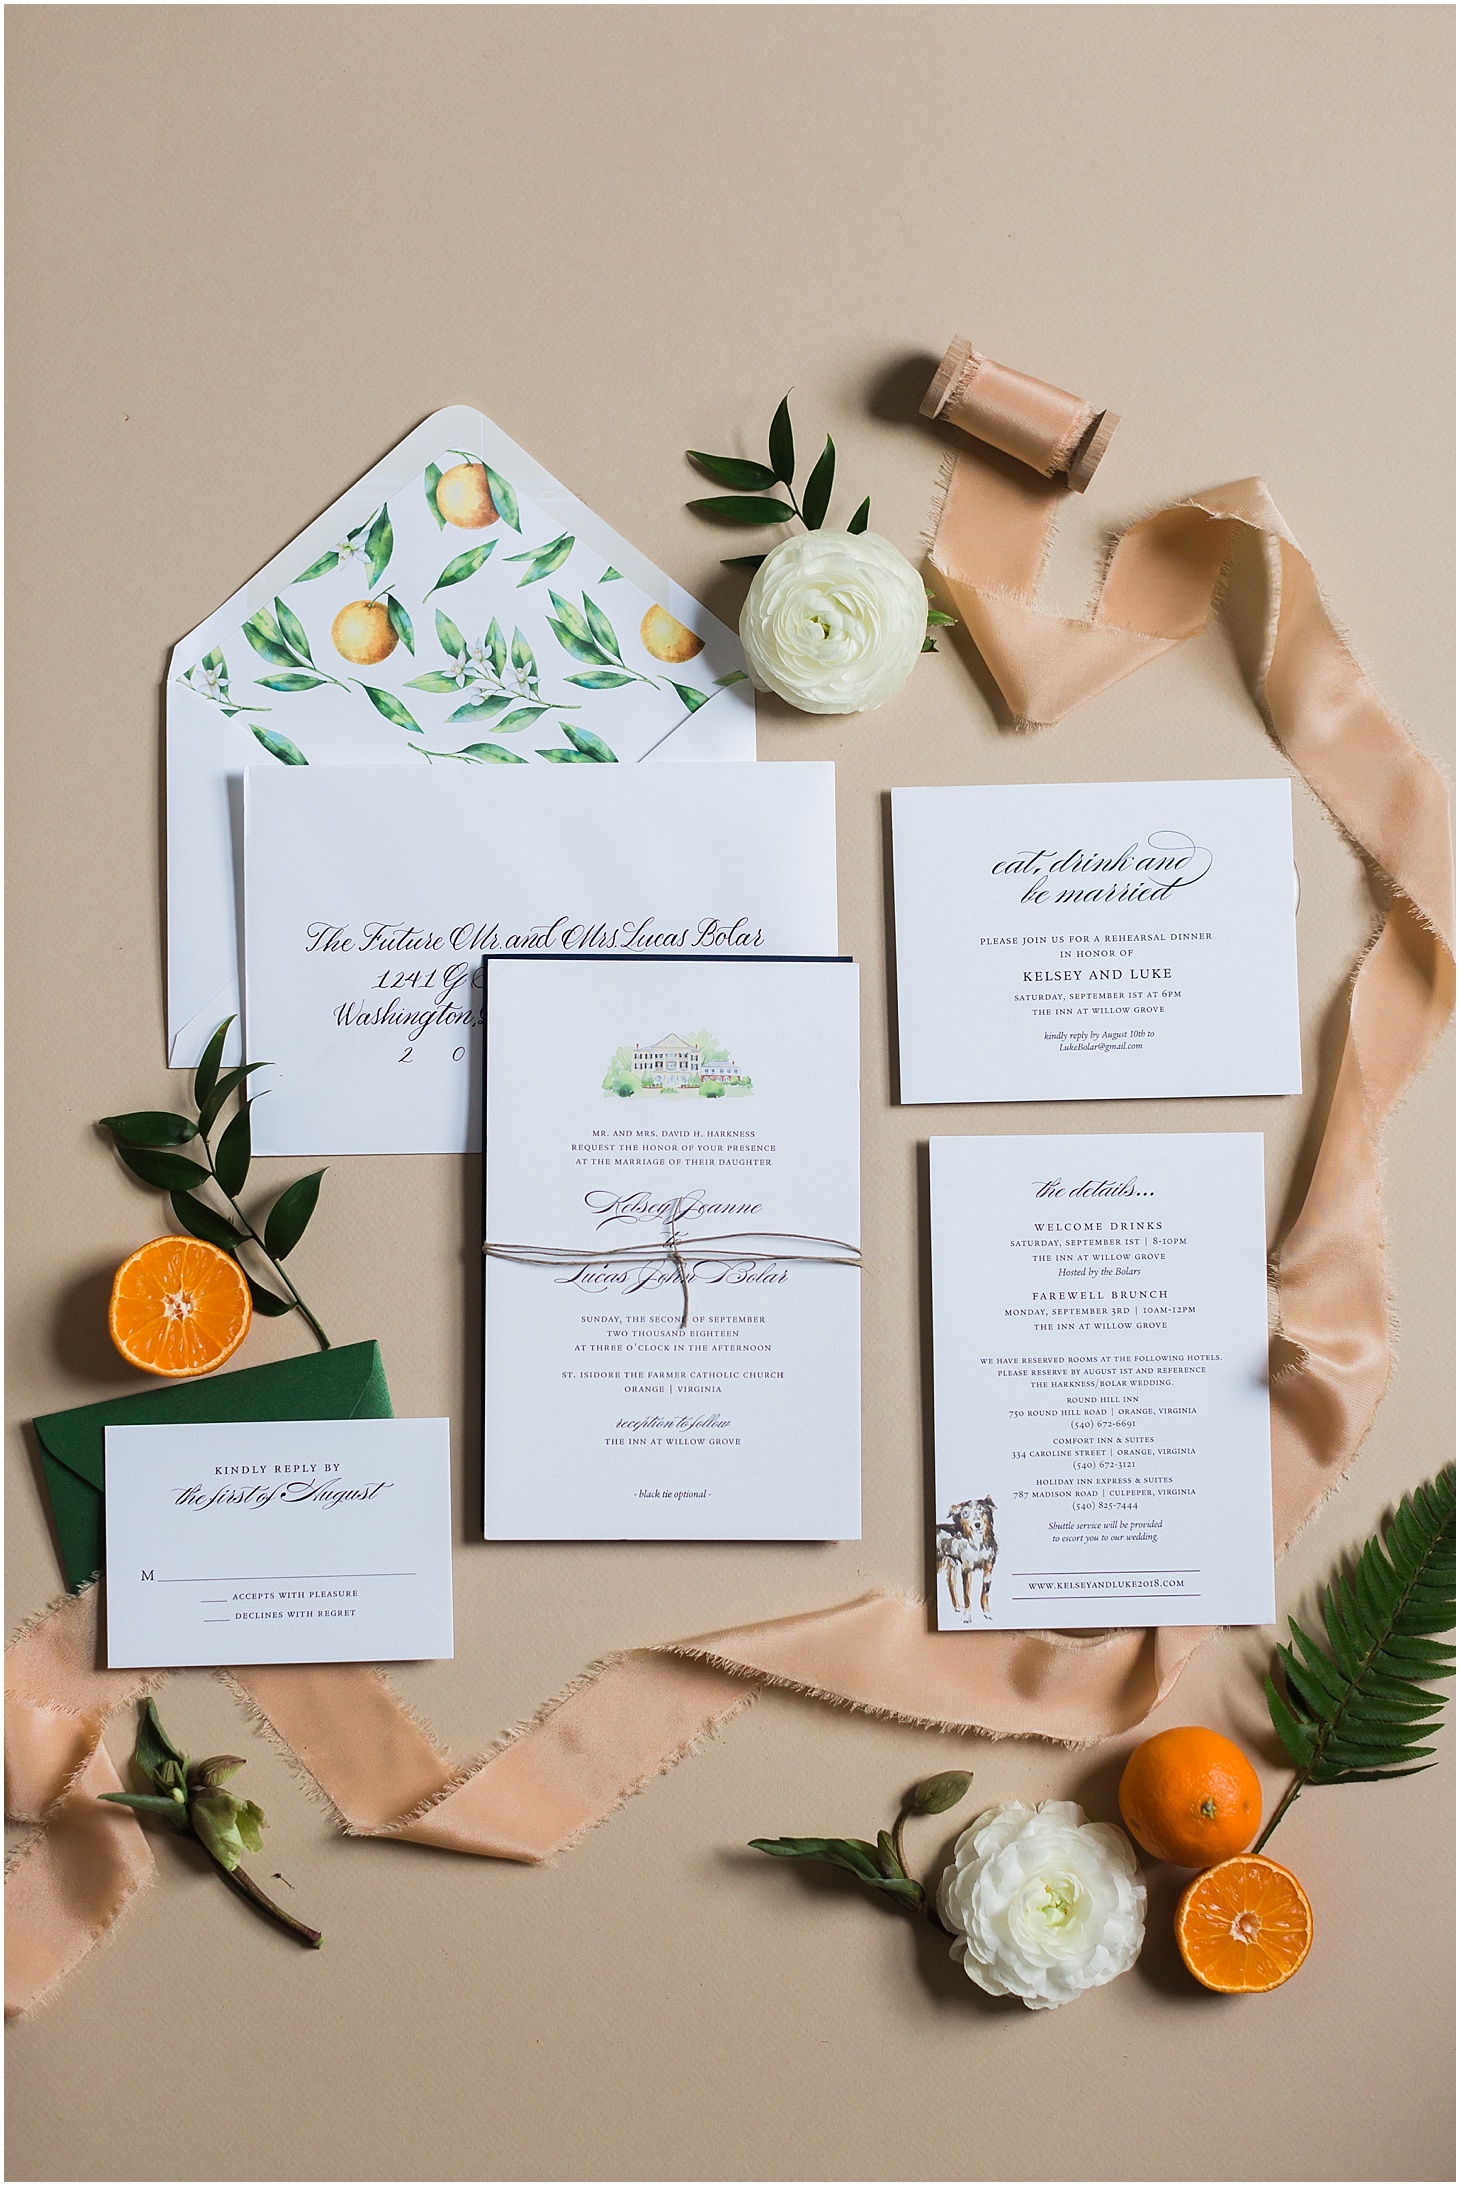 Just Ink on Paper Invitation Suite, Jenny Paxton Calligraphy, Rhian Awni Illustrations, Green and White Summer Wedding at The Inn at Willow Grove, Ceremony at St. Isidore the Farmer Catholic Church, Sarah Bradshaw Photography, DC Wedding Photographer